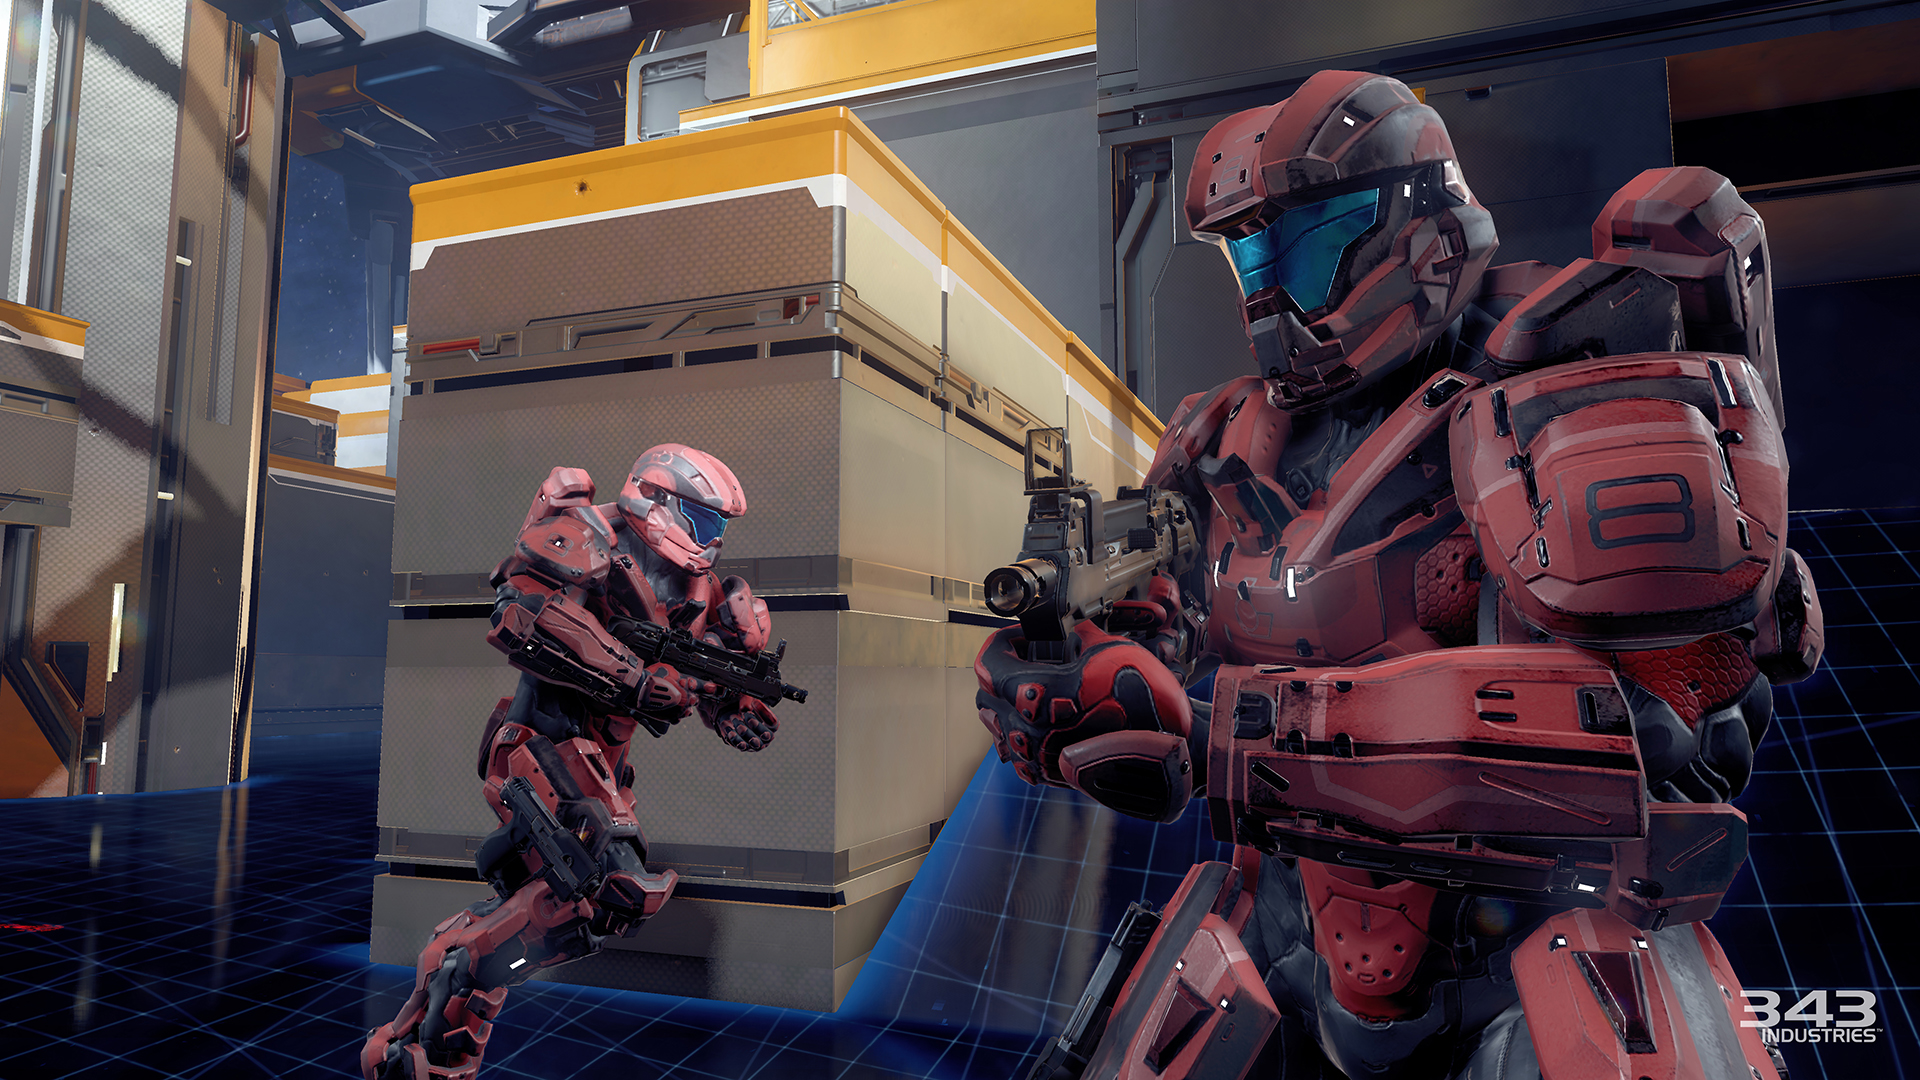 Halo 5 Update: Multiplayer Modes Will Use Dedicated Servers